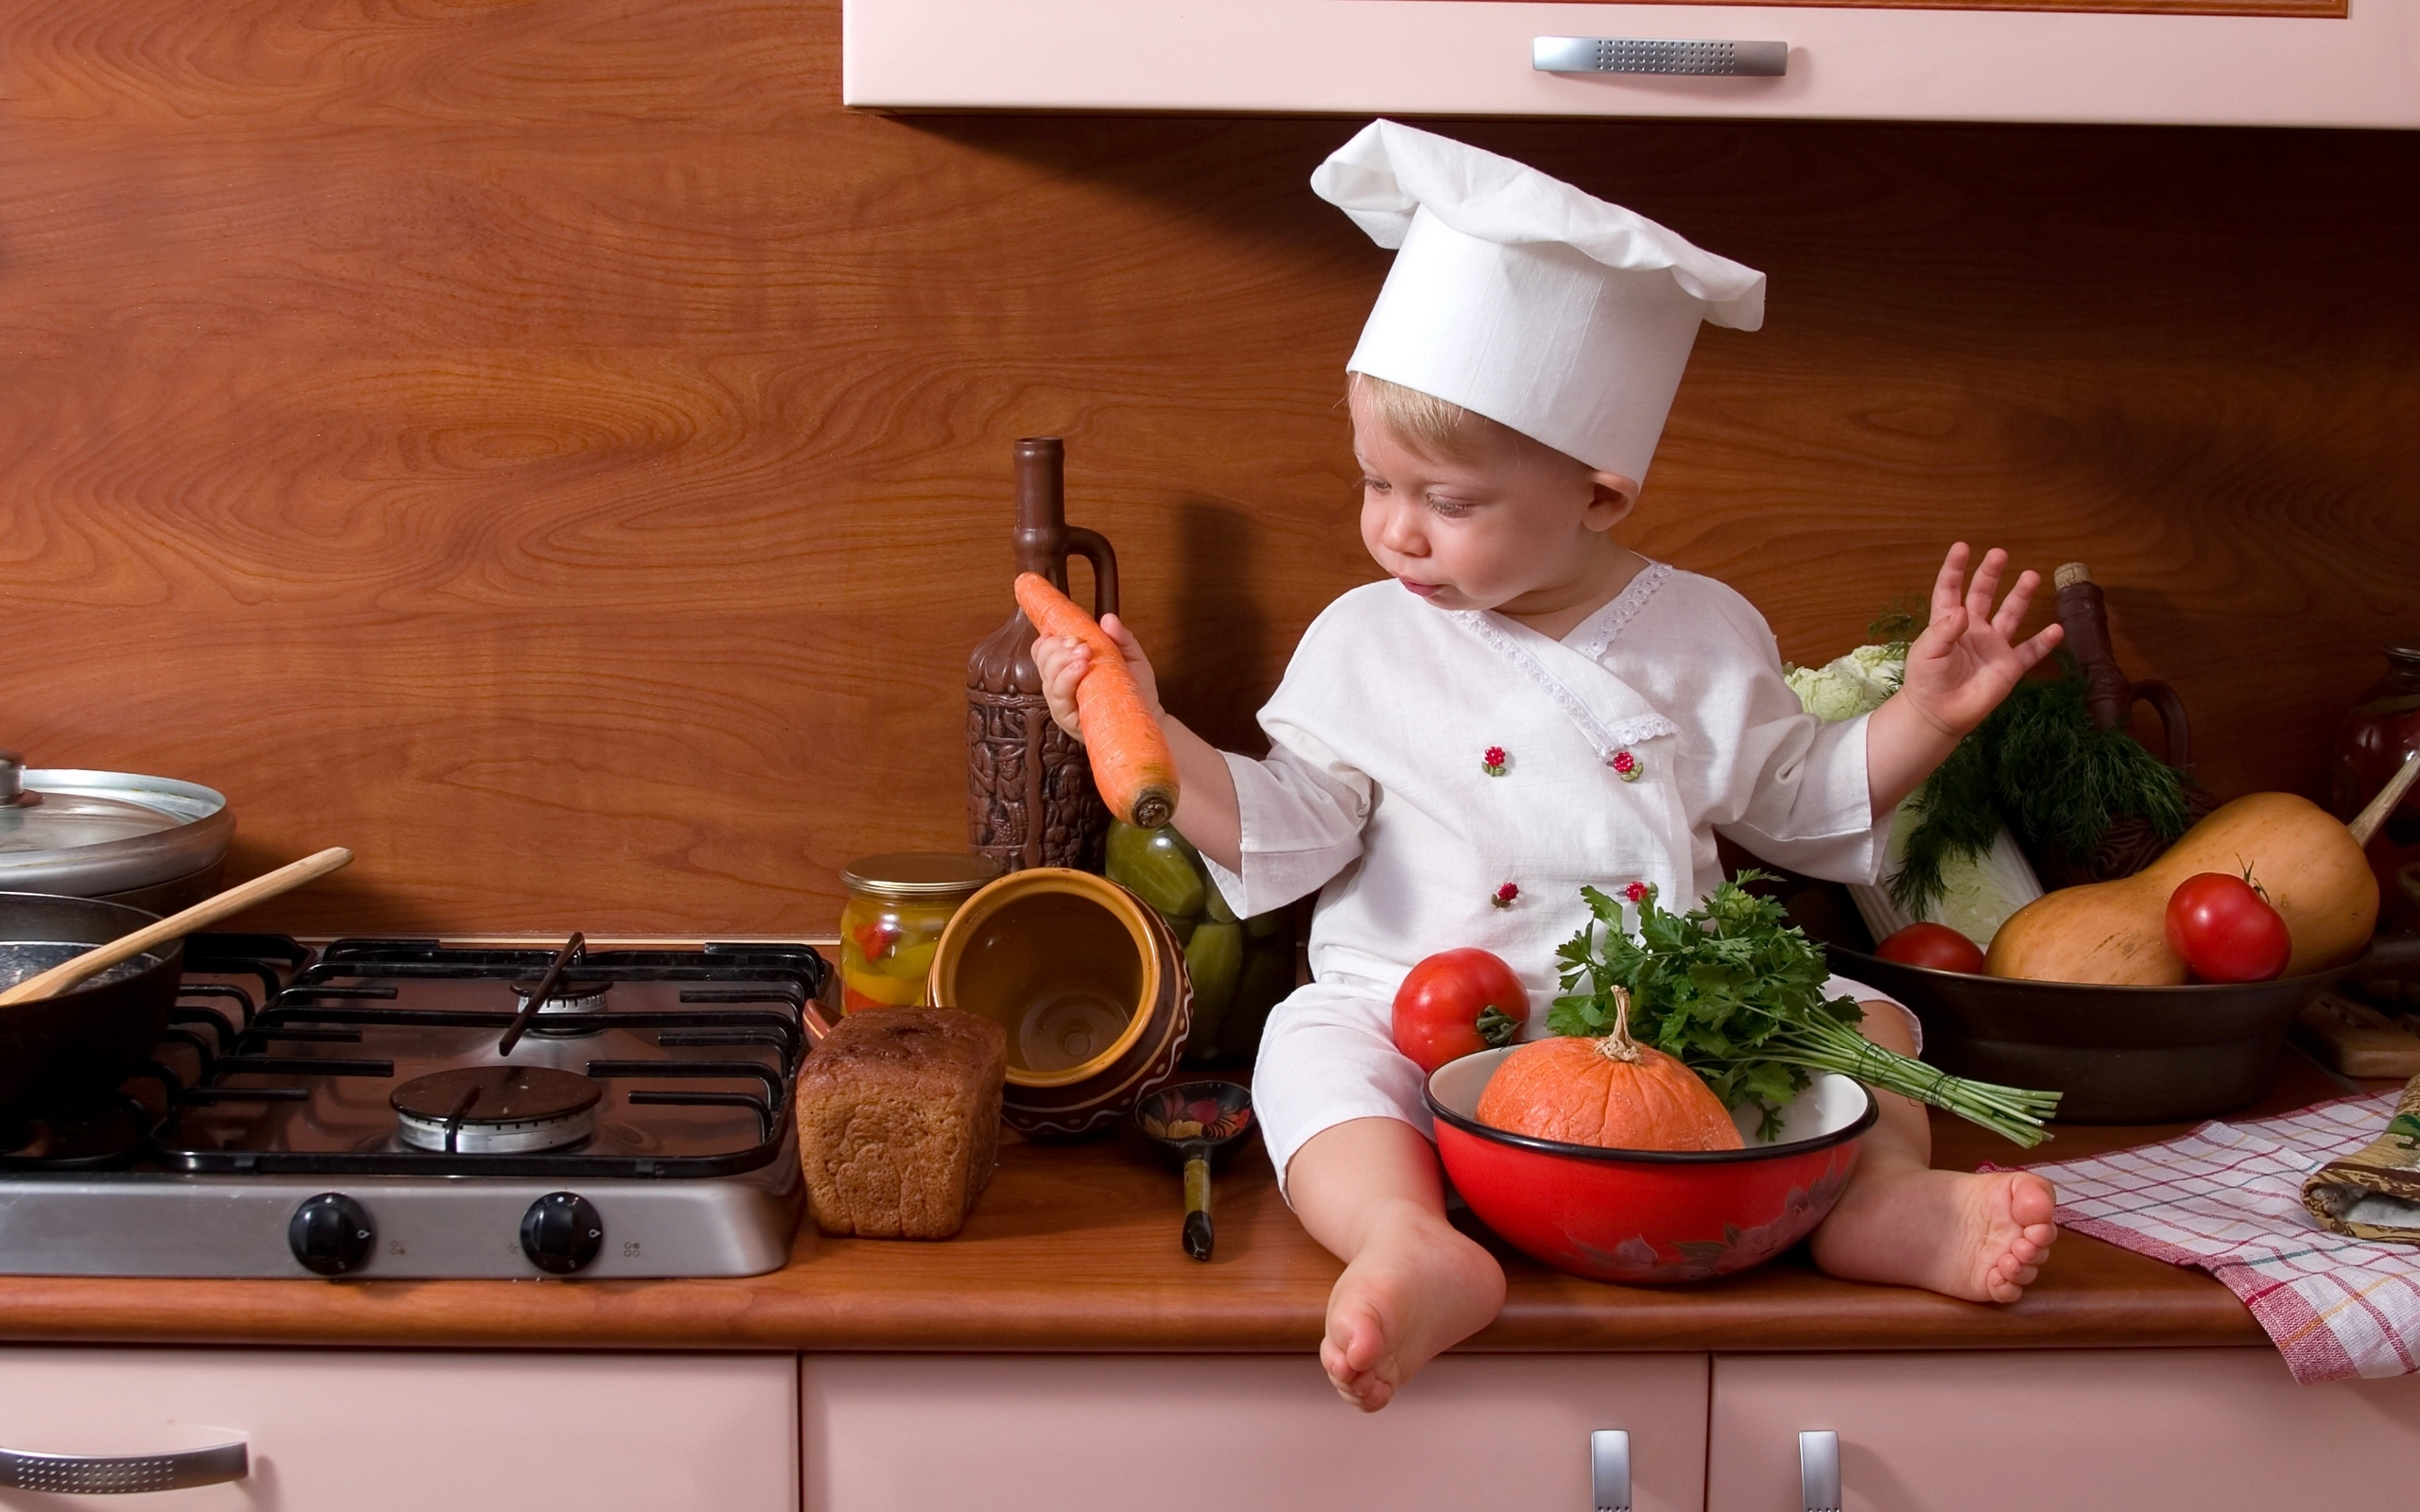 carrot, cook, tomato, kitchen, vegetables, ребёнок, child, pumpkin, stove, bread, parsley